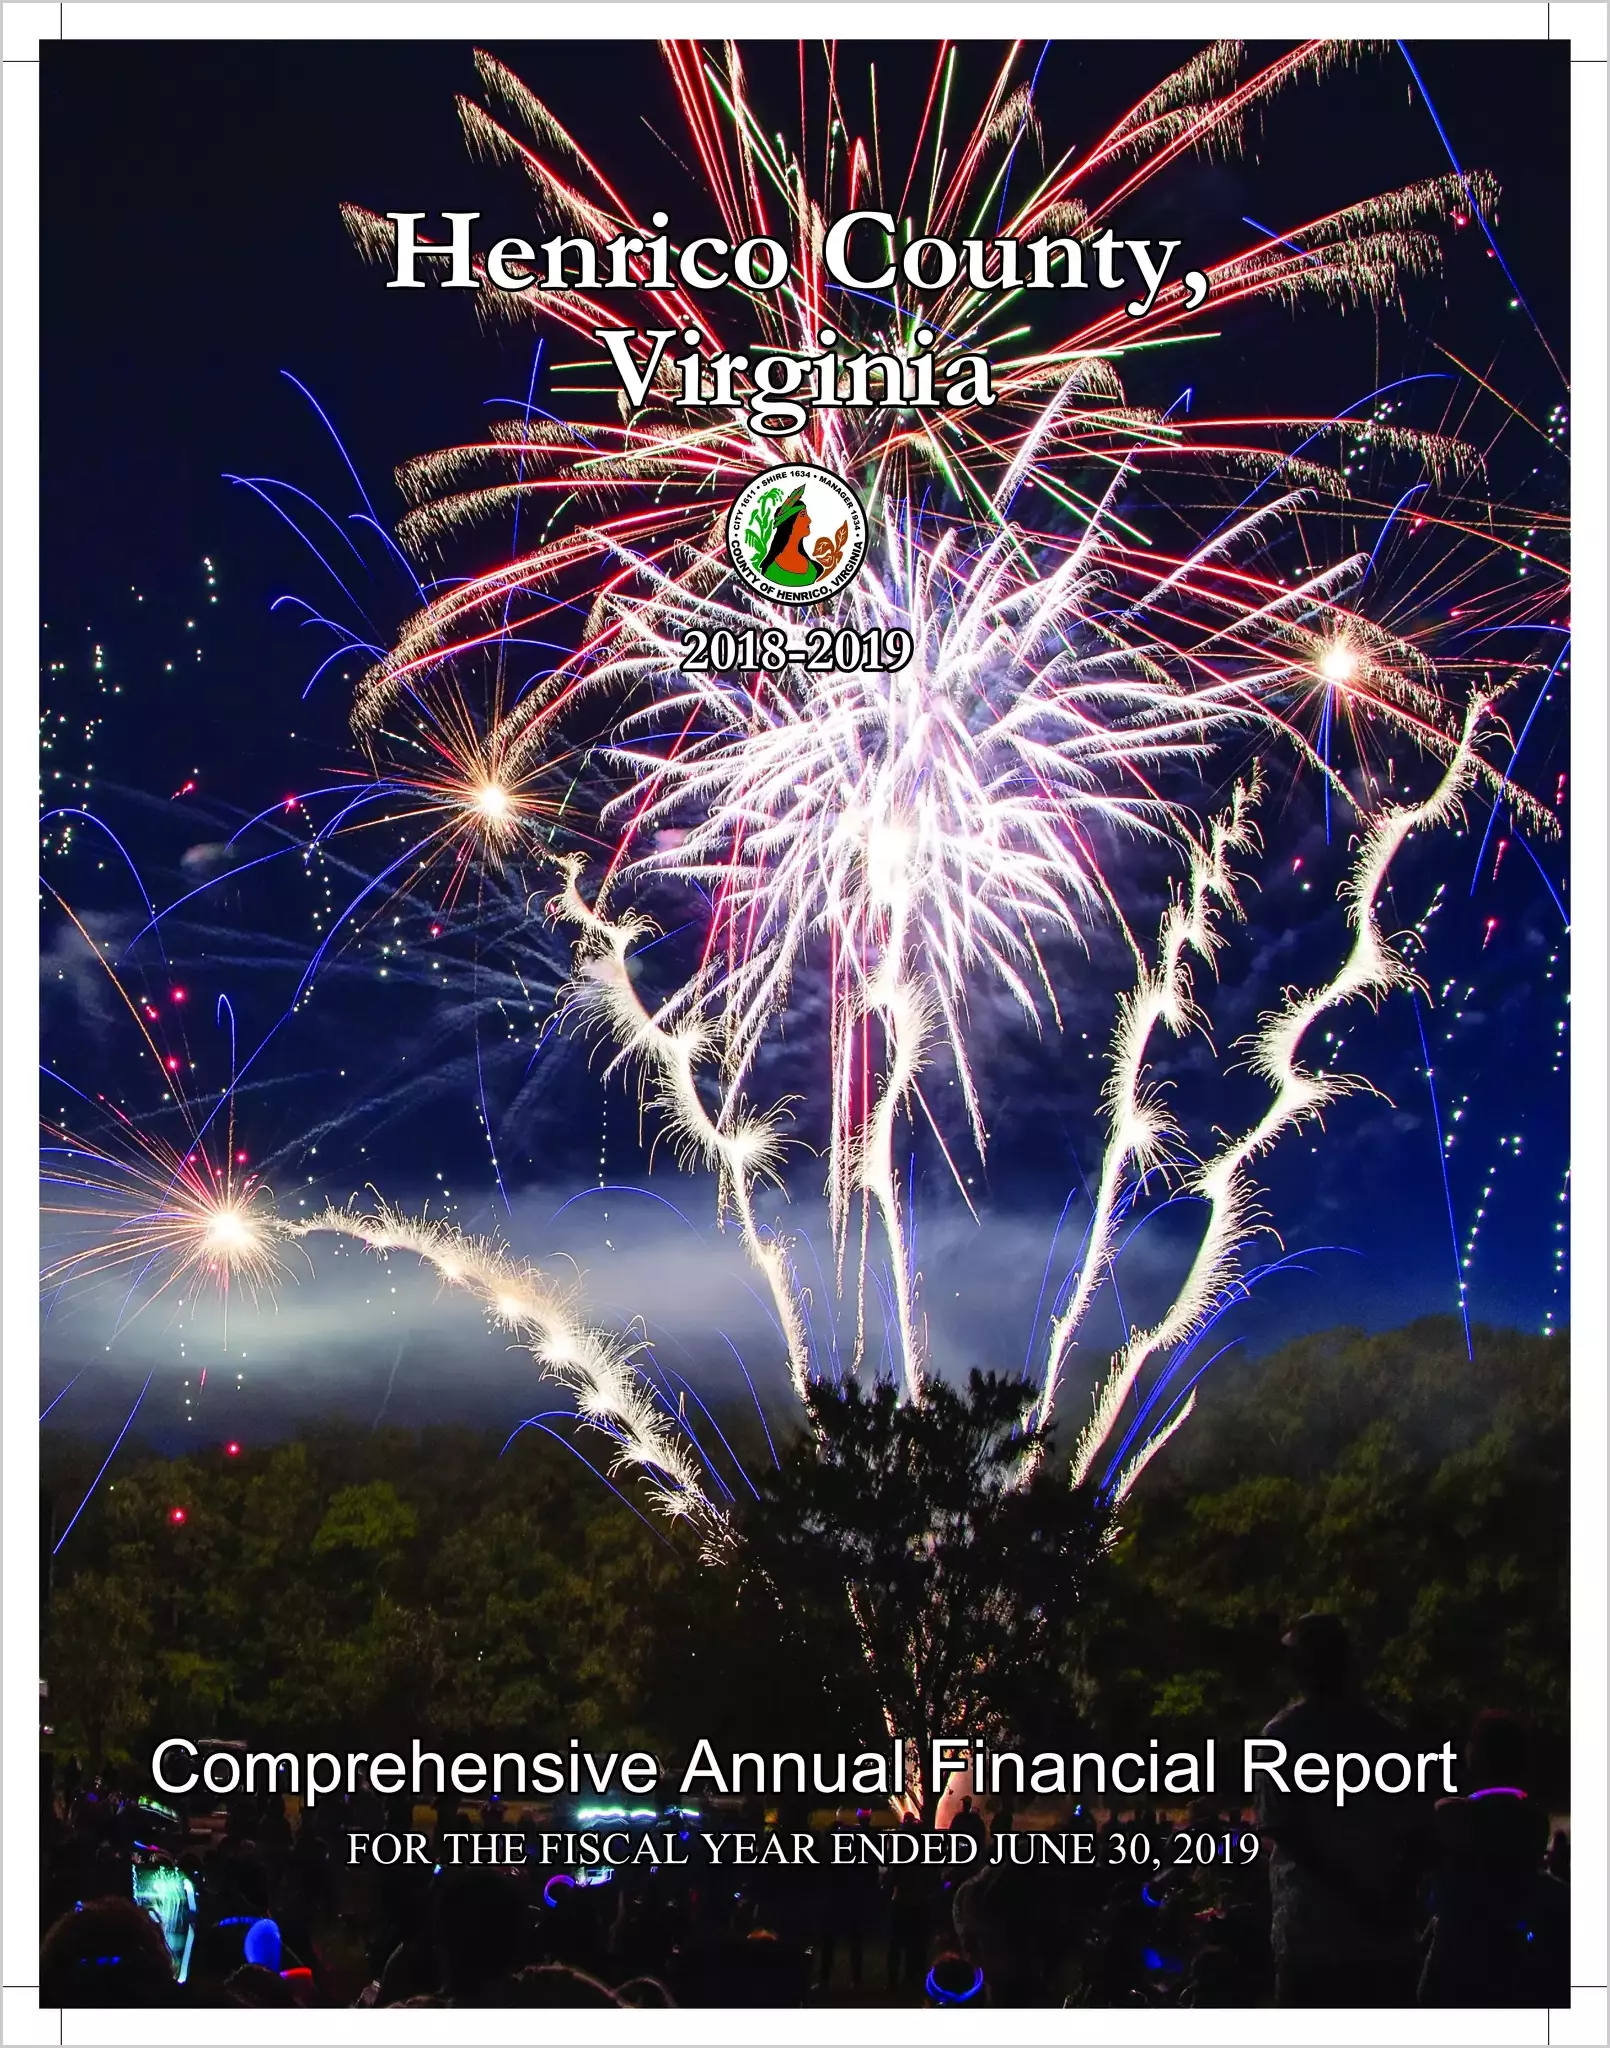 2019 Annual Financial Report for County of Henrico